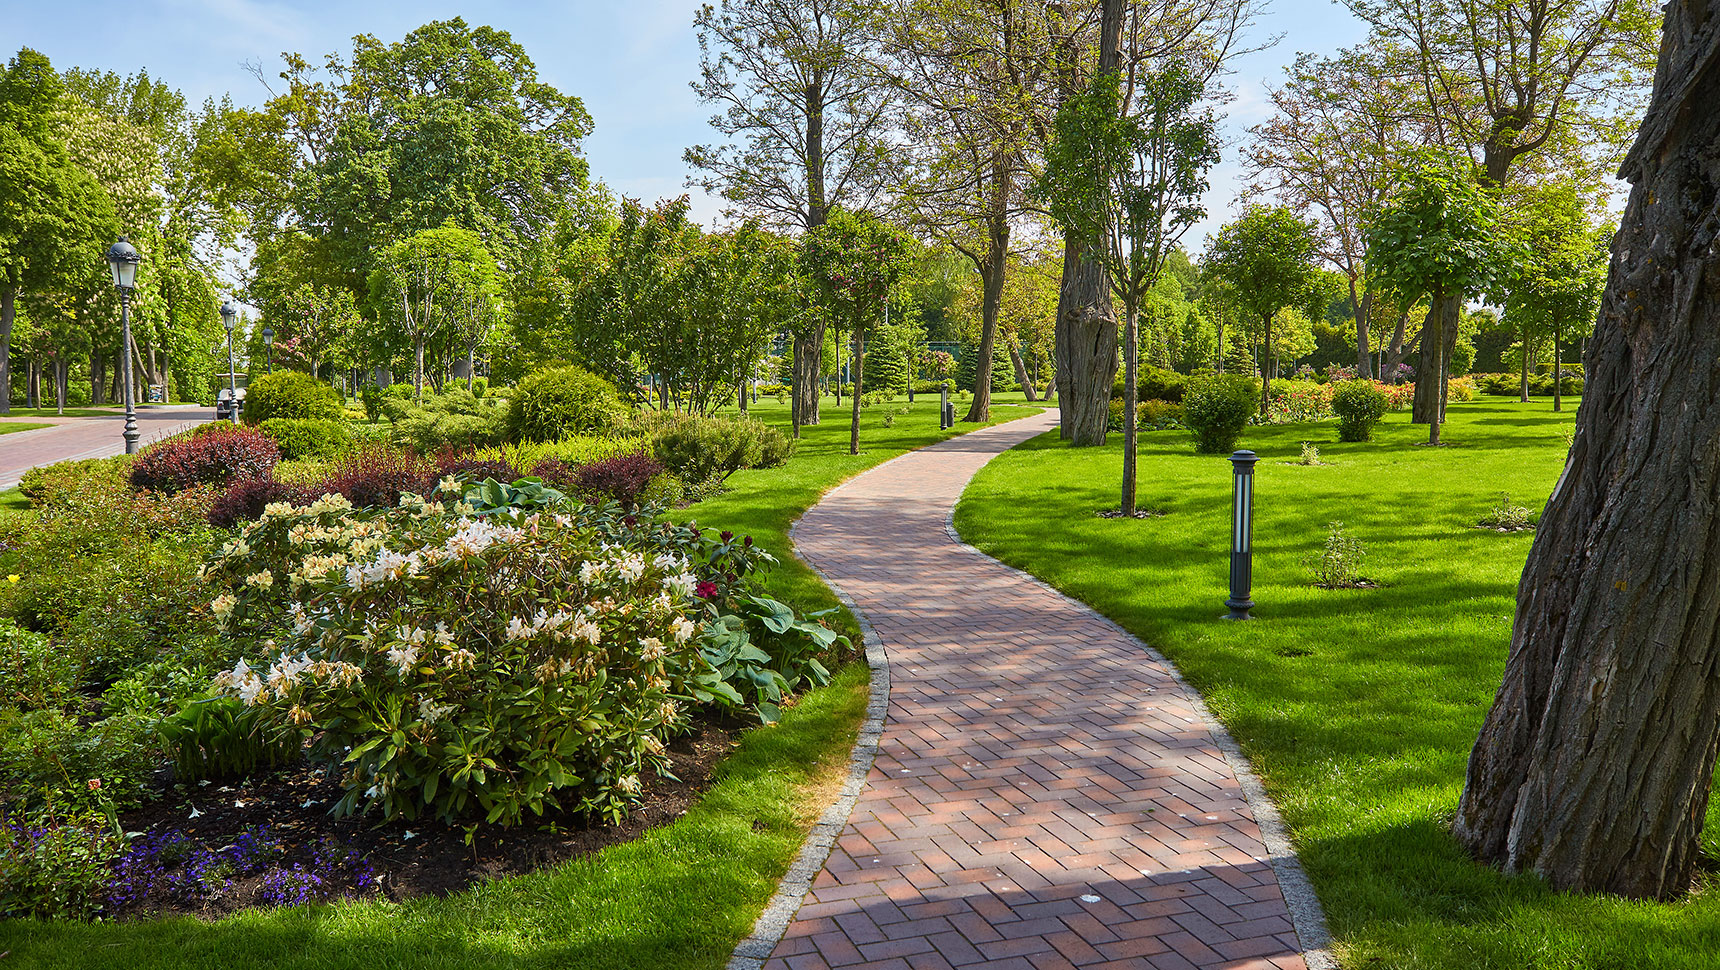 Park pathway with grass and plantings